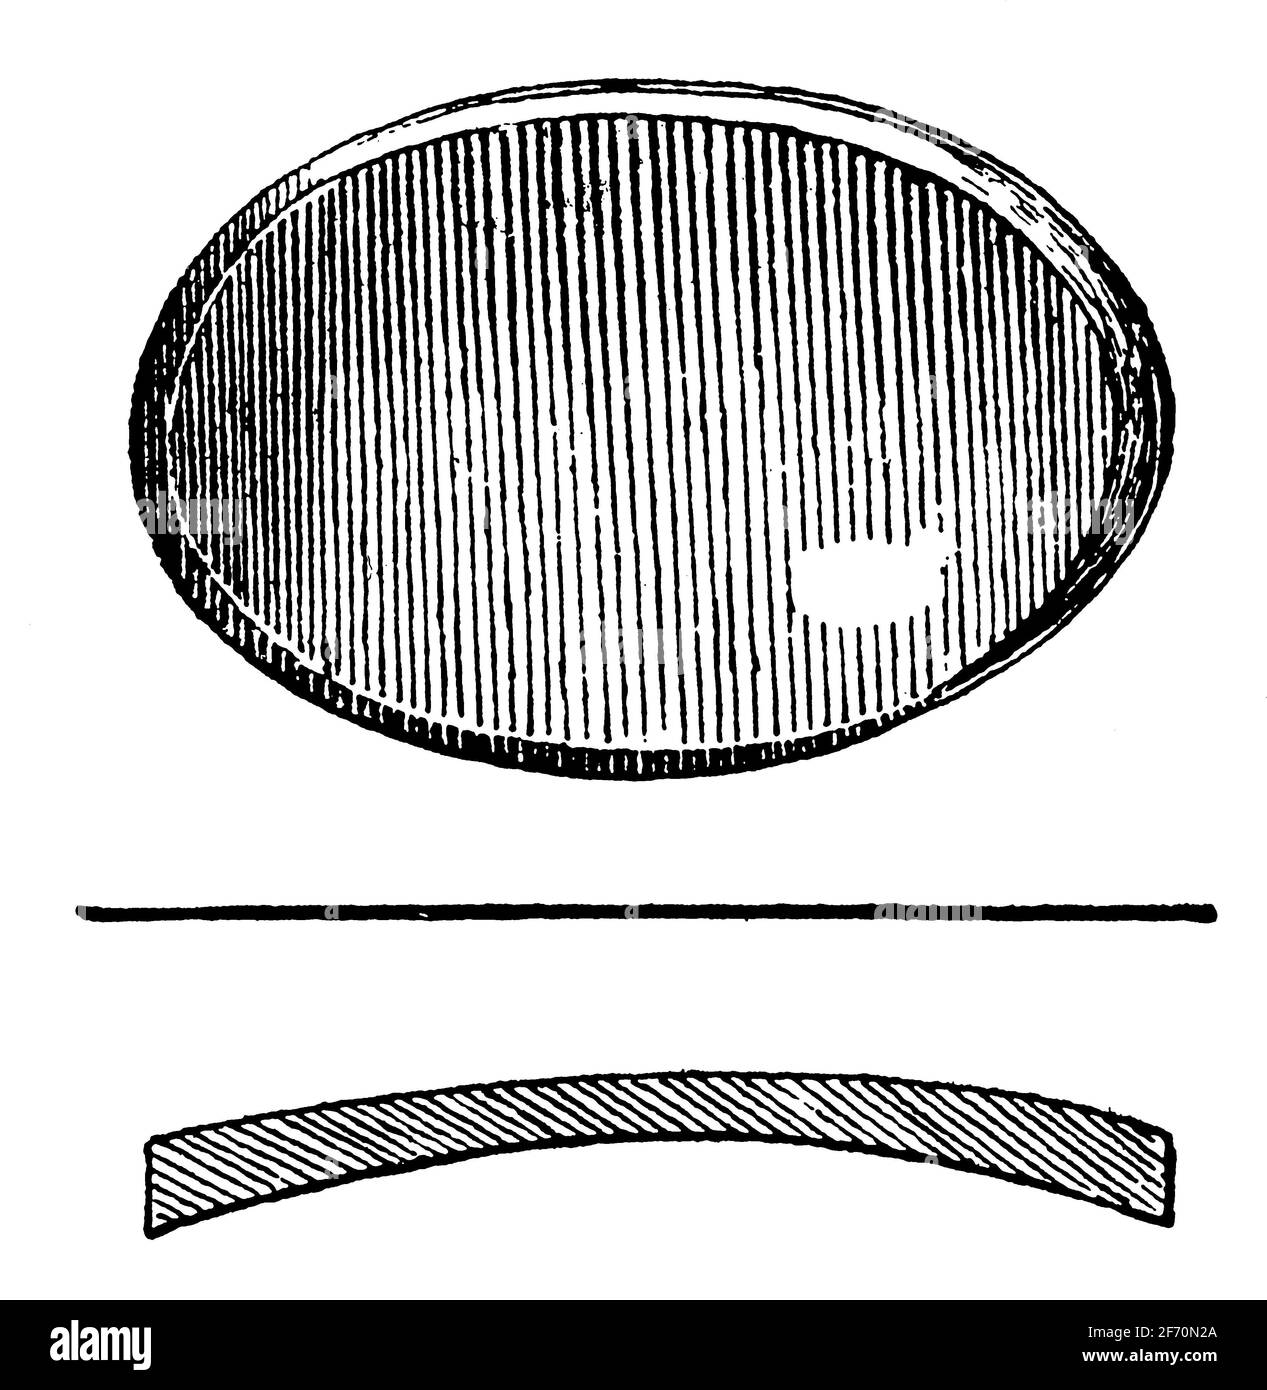 Convex-concave (periscopic) lens. Illustration of the 19th century. Germany. White background. Stock Photo